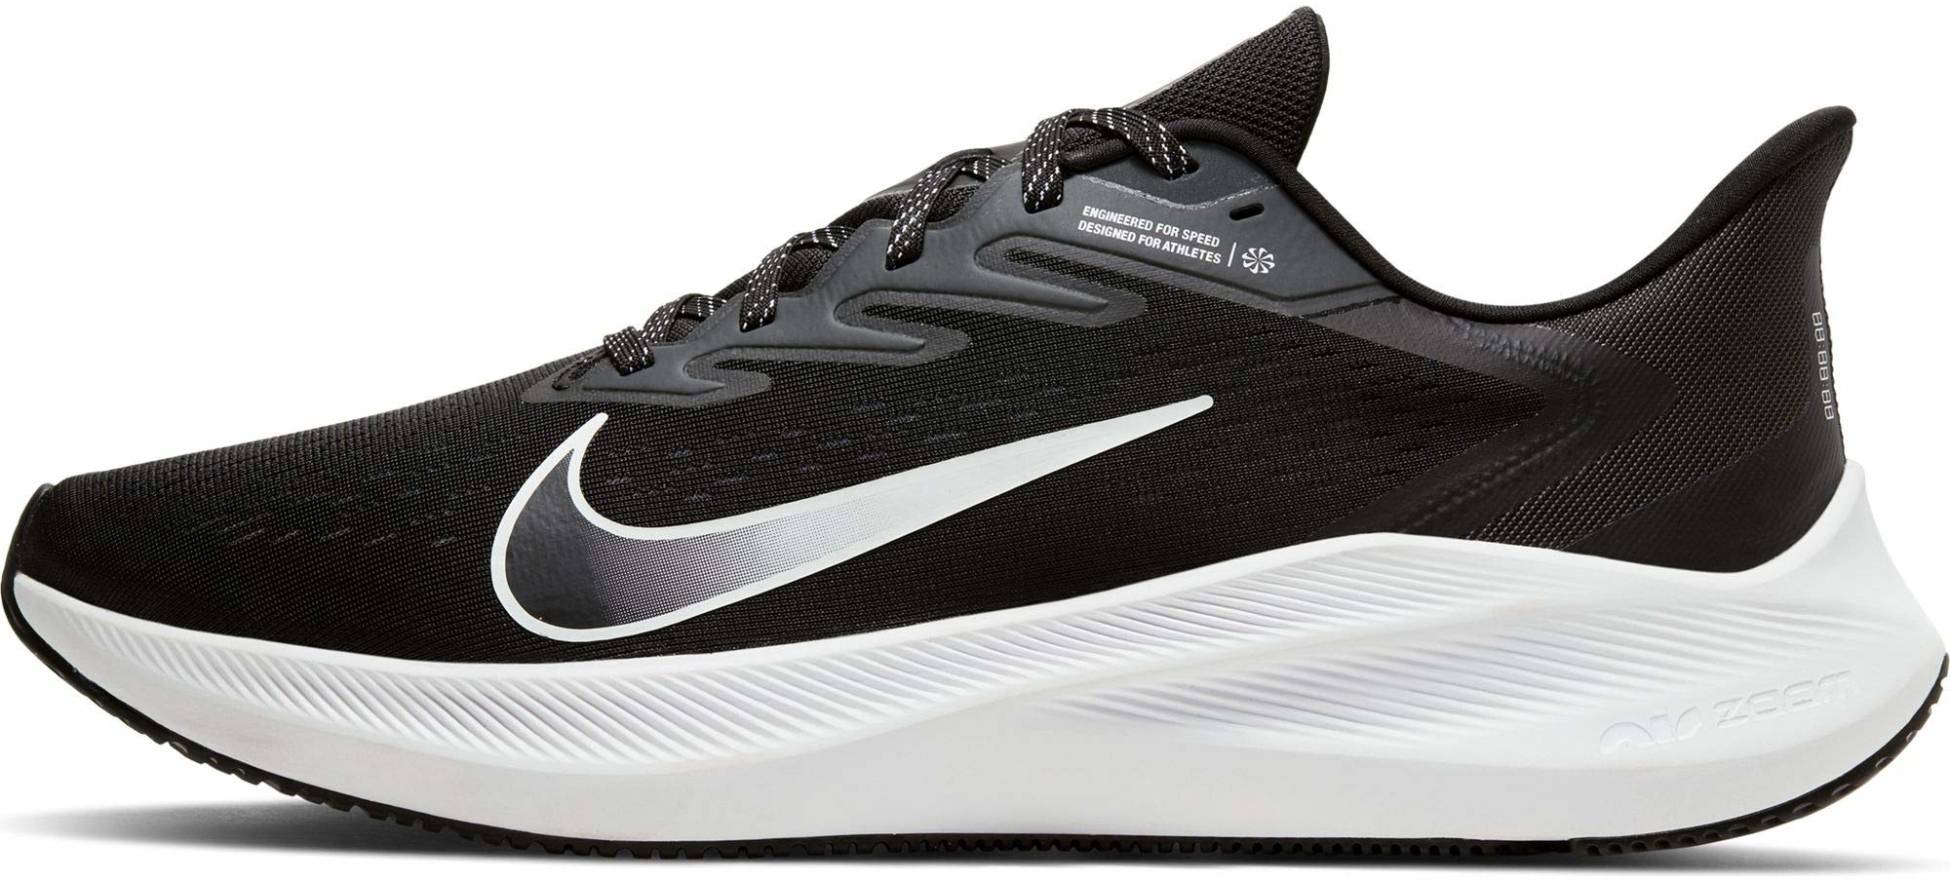 Nike Air Zoom Winflo 7 - Review 2021 - Facts, Deals ($75) | RunRepeat